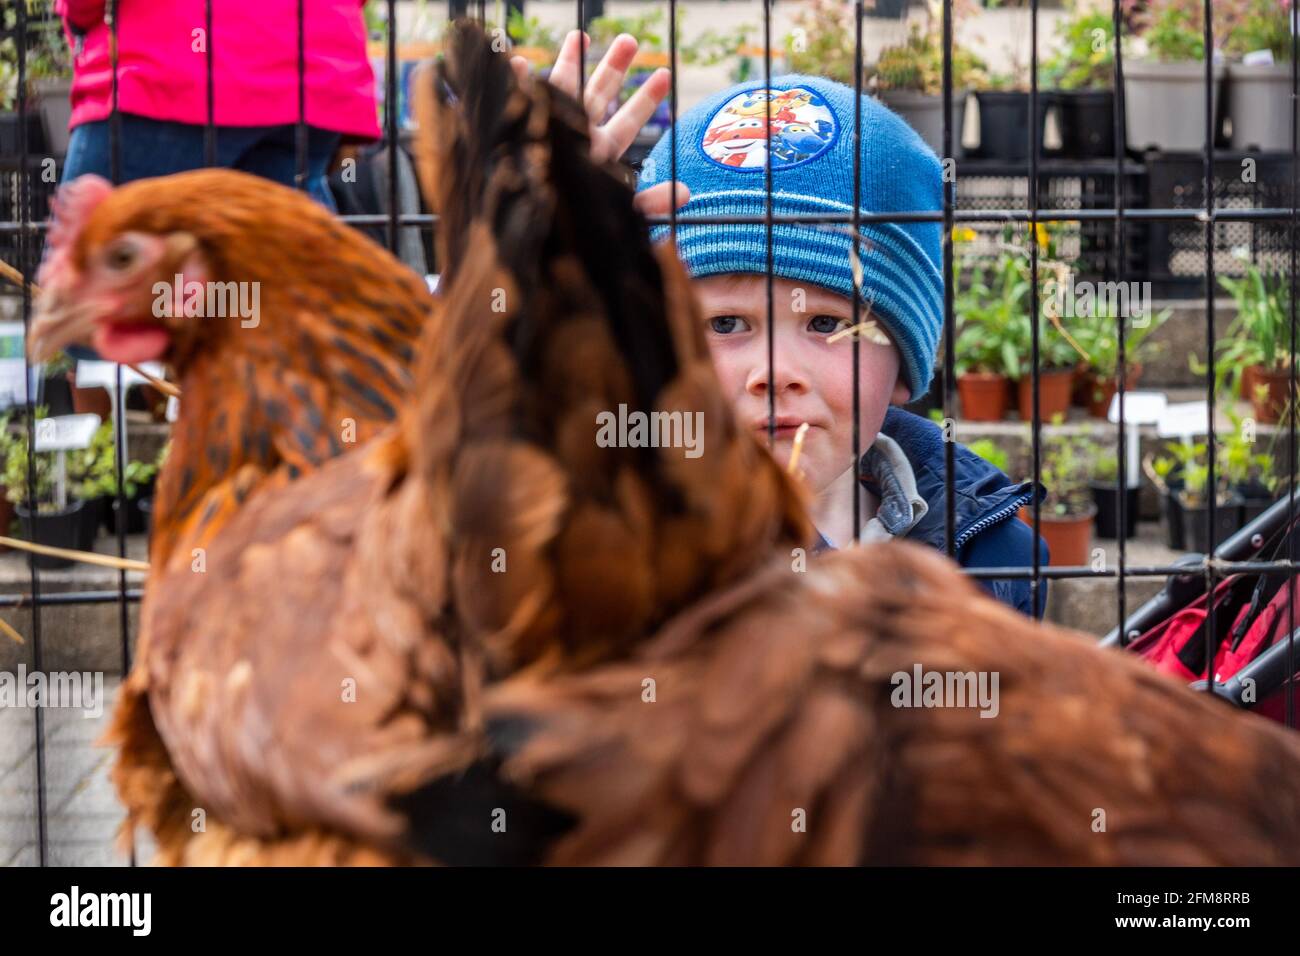 Bantry, West Cork, Ireland. 7th May, 2021. Bantry Friday Market was busy today, being the first market of the month. Many people were looking forward to some COVID-19 restrictions being relaxed on Monday 10th May. Looking at the chickens for sale was 2 1/2 year old Daniel Murphy from Douglas. Credit: AG News/Alamy Live News Stock Photo